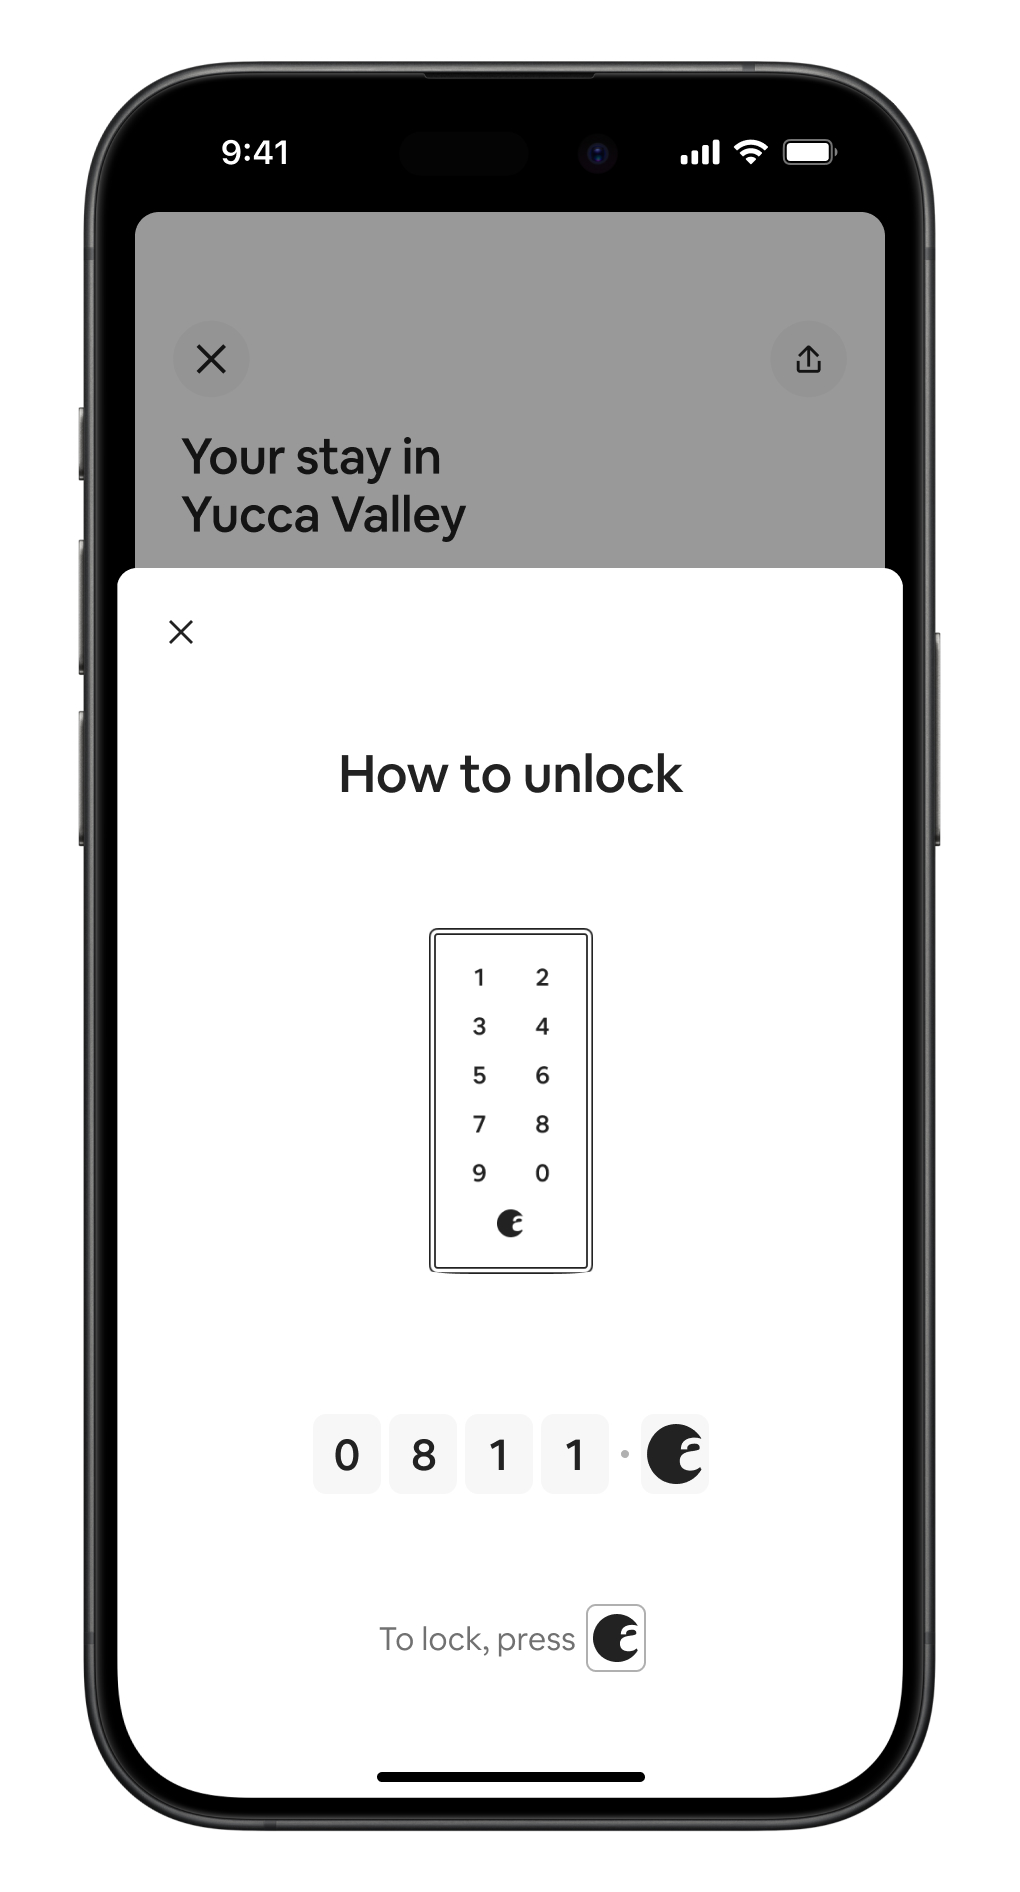 Phone screen with instructions for unlocking a August lock.